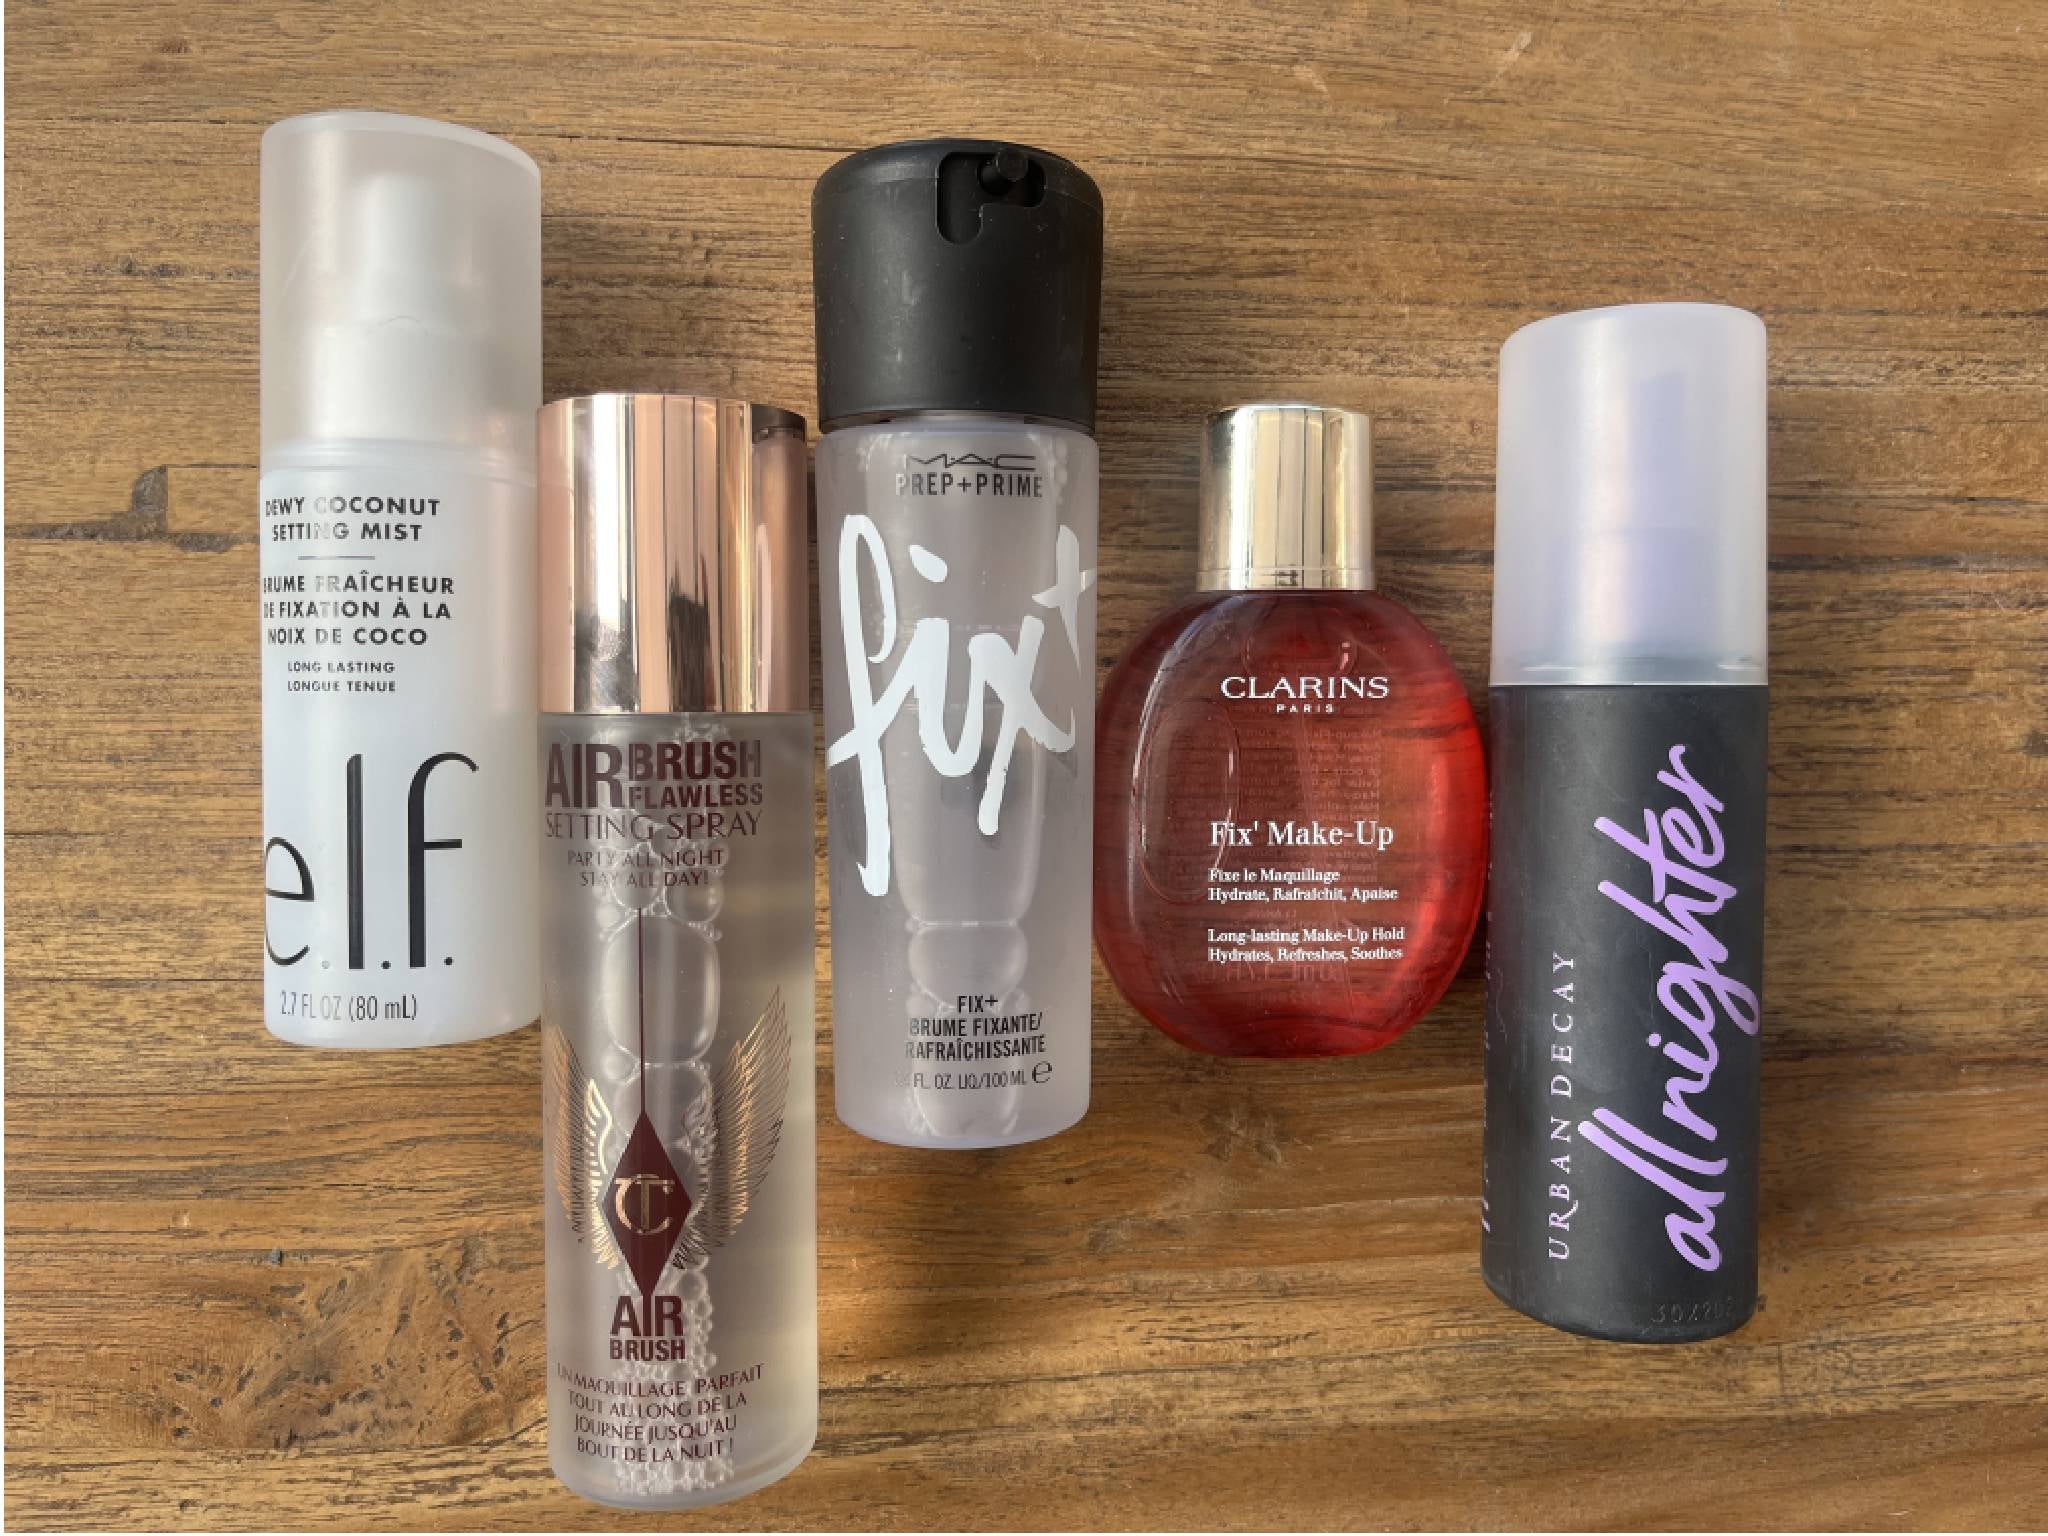 A selection of the make-up setting sprays we tested